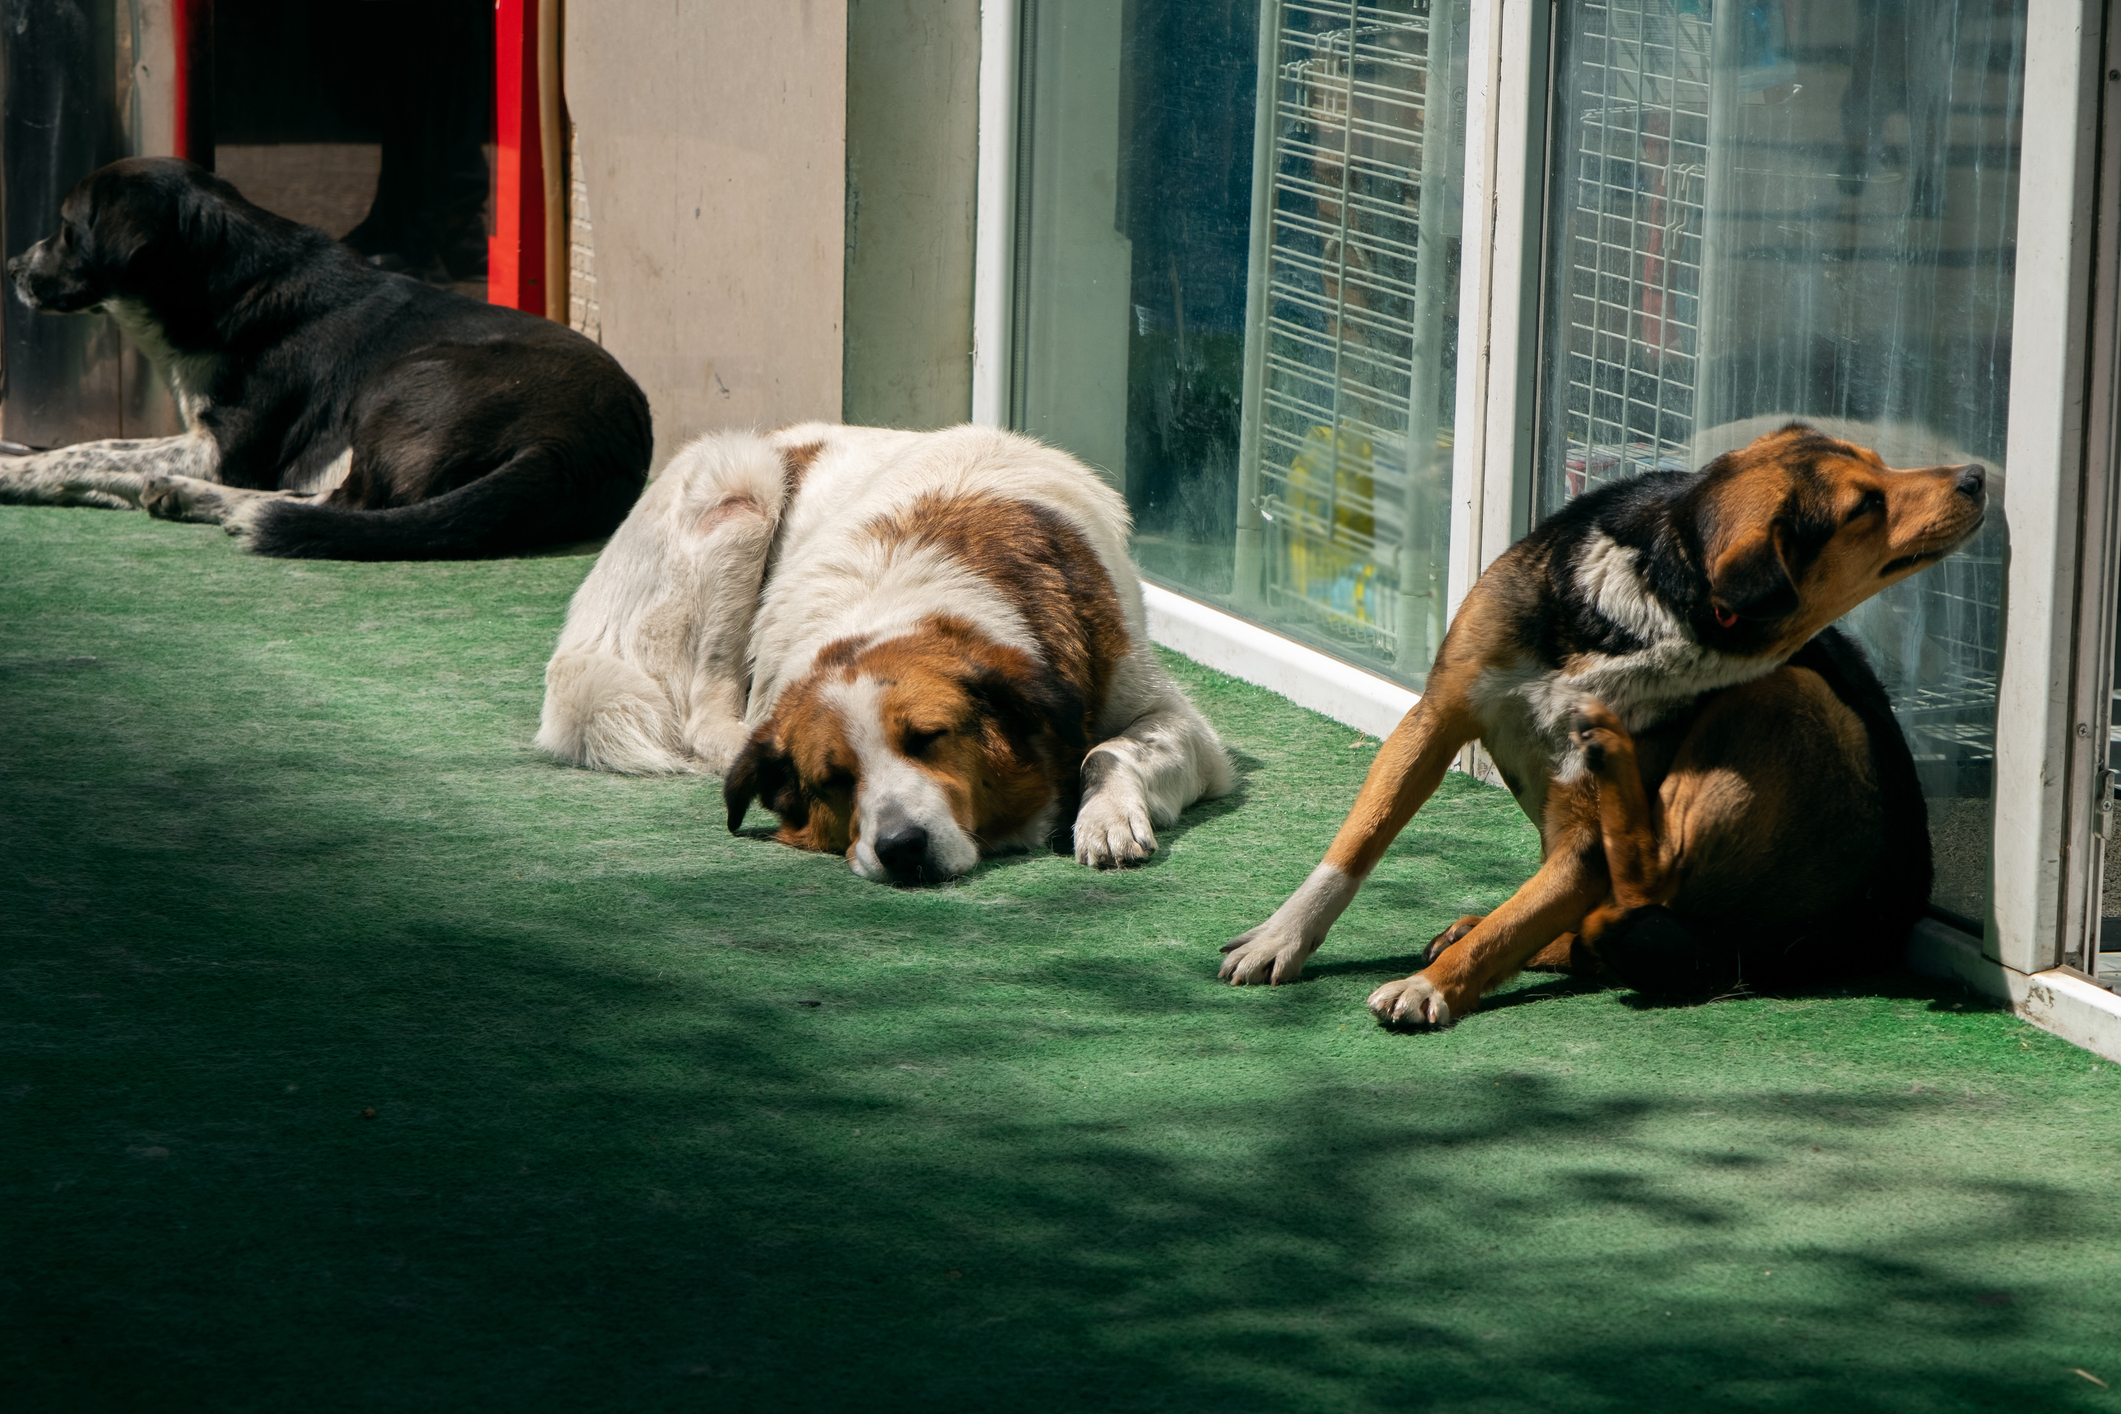 Three dogs lounging on the floor with one scratching its ear